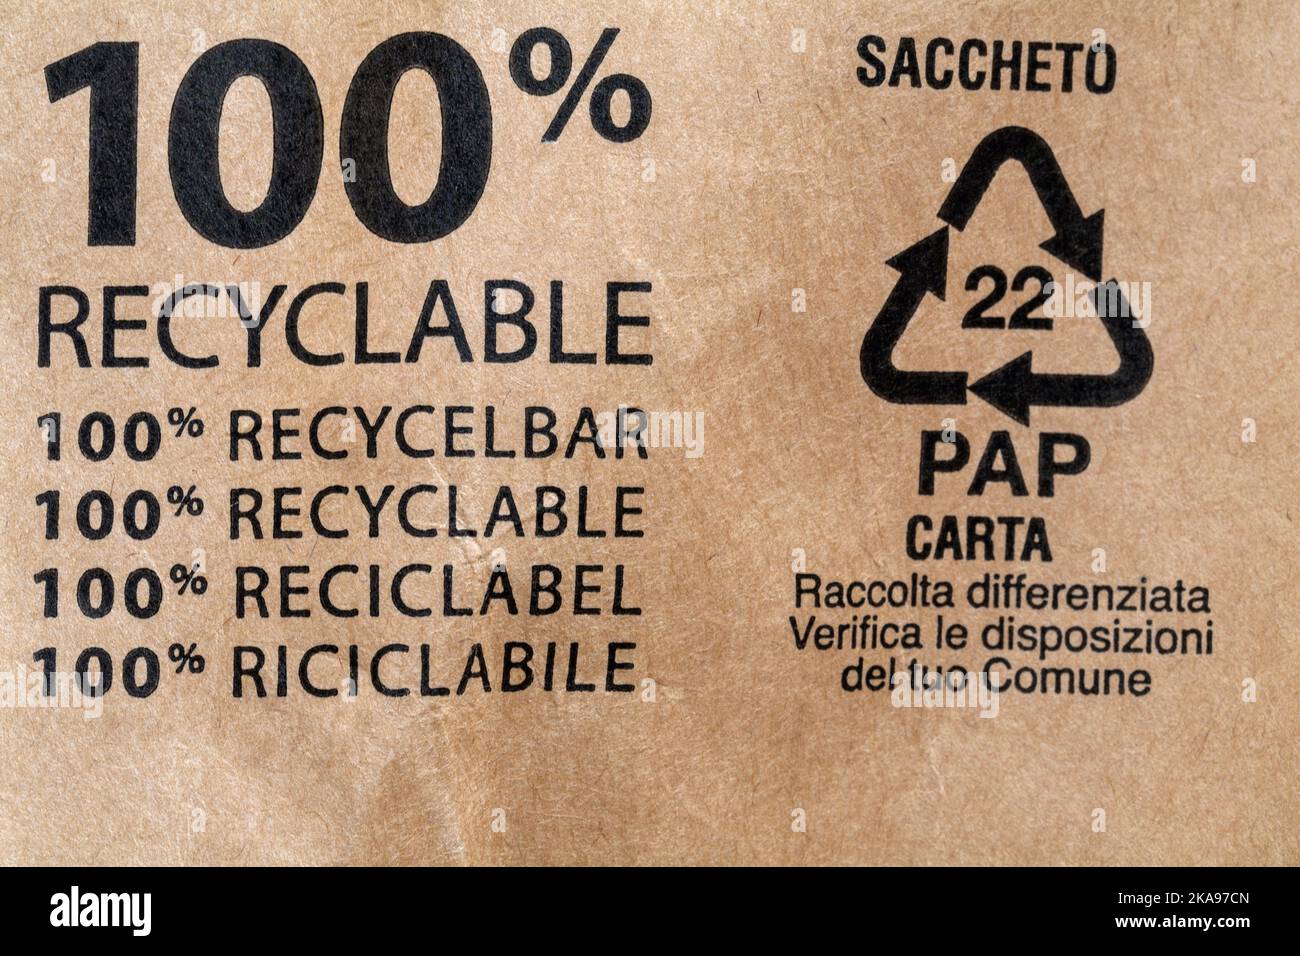 100% recyclable 22 PAP in various languages on brown paper bag packaging from Amazon - disposal recycling recycle logo symbol Stock Photo